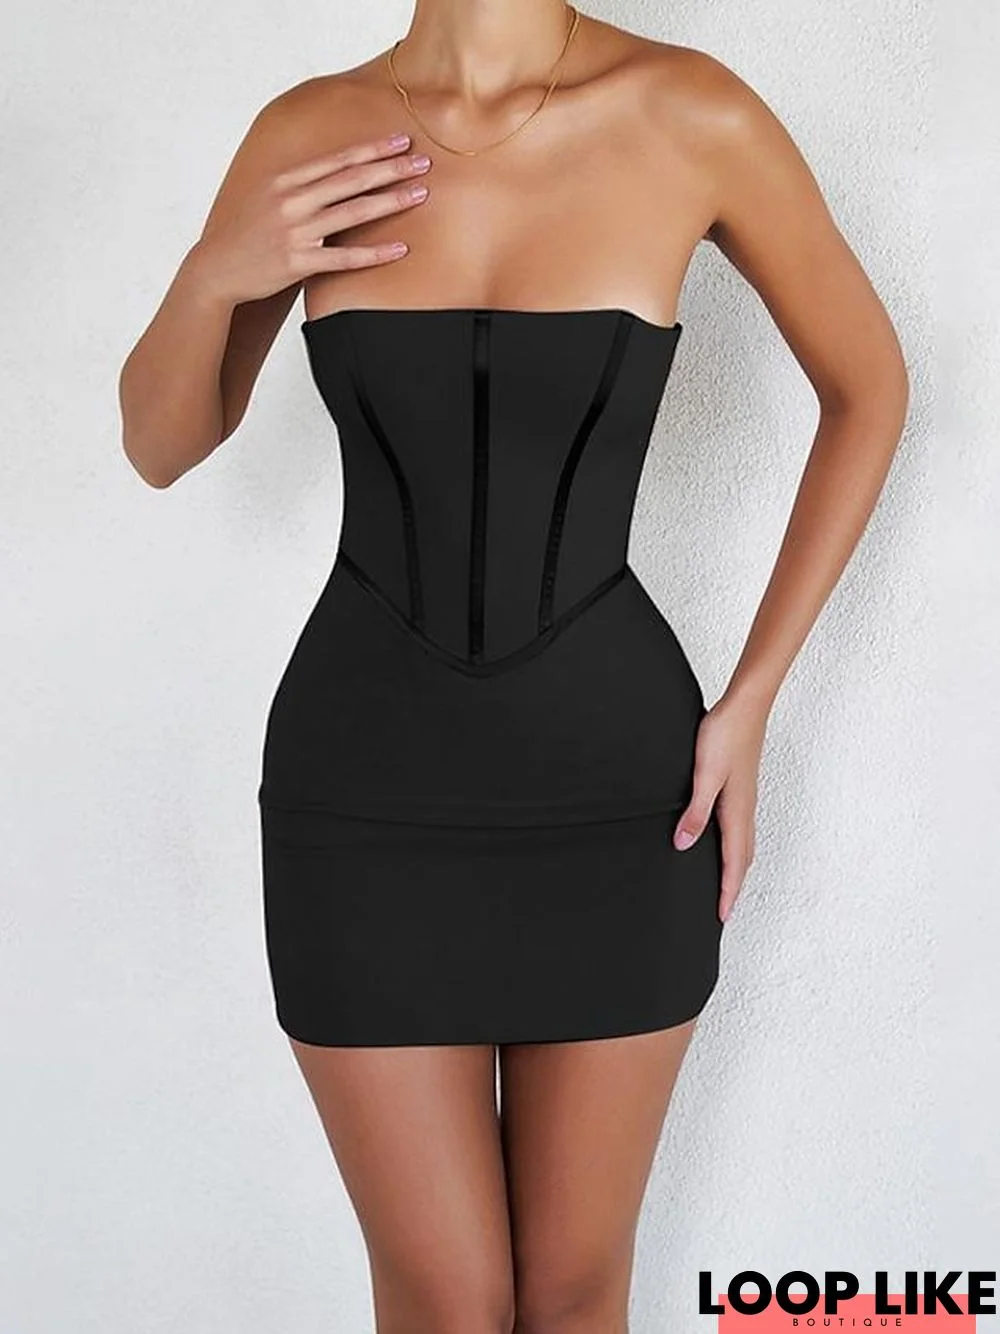 Women's Party Dress Corset Dress Sheath Dress Mini Dress Black Brown Sleeveless Pure Color Backless Spring Summer Off Shoulder Party Party Spring Dress Slim 2023 S M L